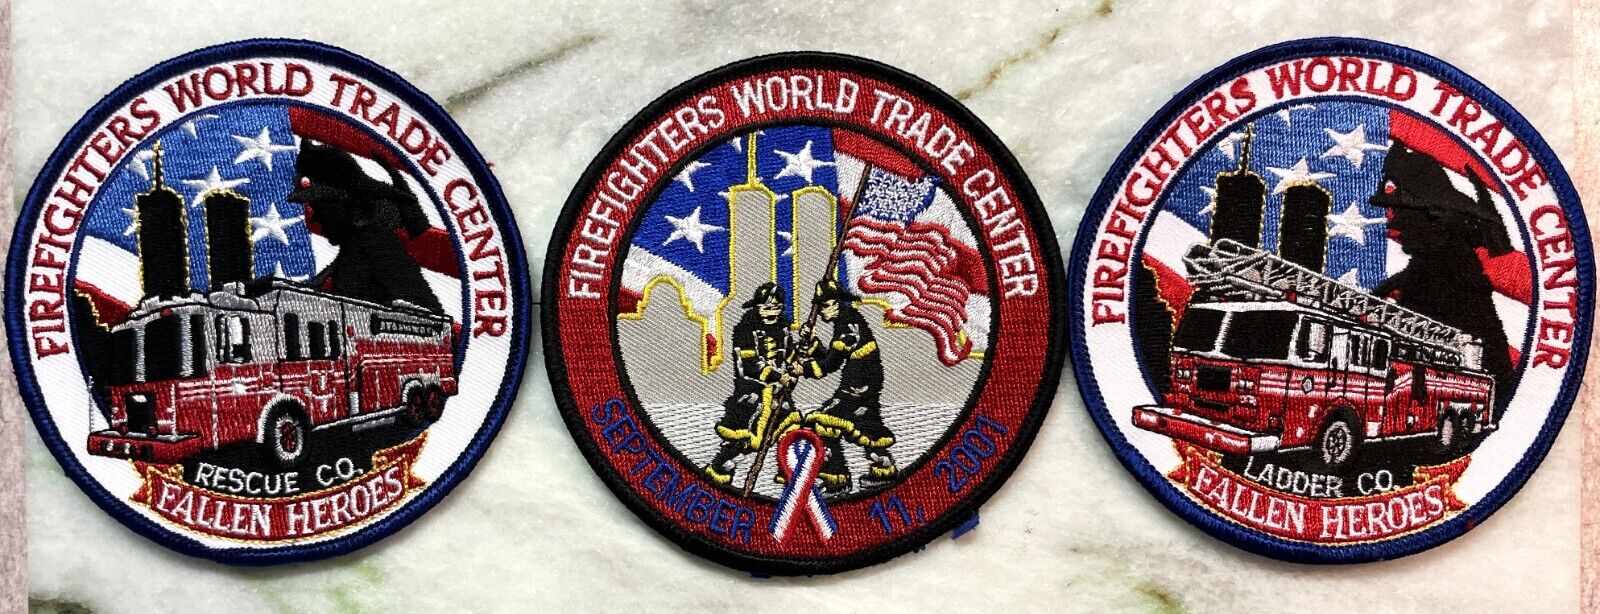 WTC September 11, 2001- Orginal 9-11 FDNY Ladder&Rescue Truck, Flag Patches-3